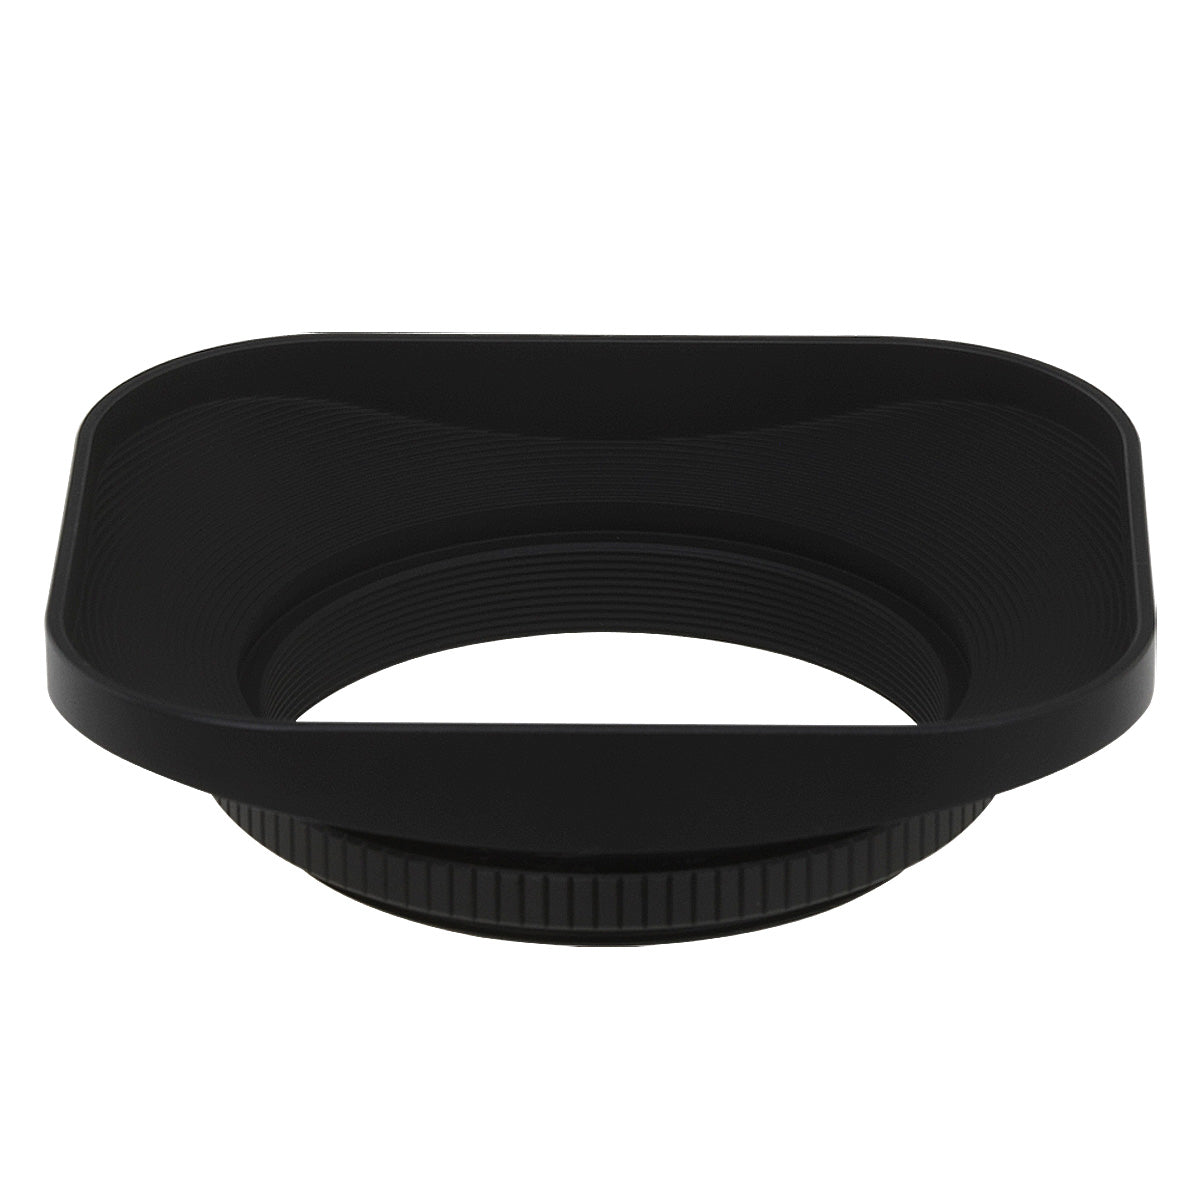 Haoge LH-B46T 46mm Square Metal Screw-in Lens Hood with Cap for Leica Summilux-M 35mm f/1.4 50mm f1.4 E46, Summarit-M 90mm f/2.5 75mm f2.5 E46, Summicron-M 28mm F2 E46, Voigtlander 35mm f/1.7 28mm f2